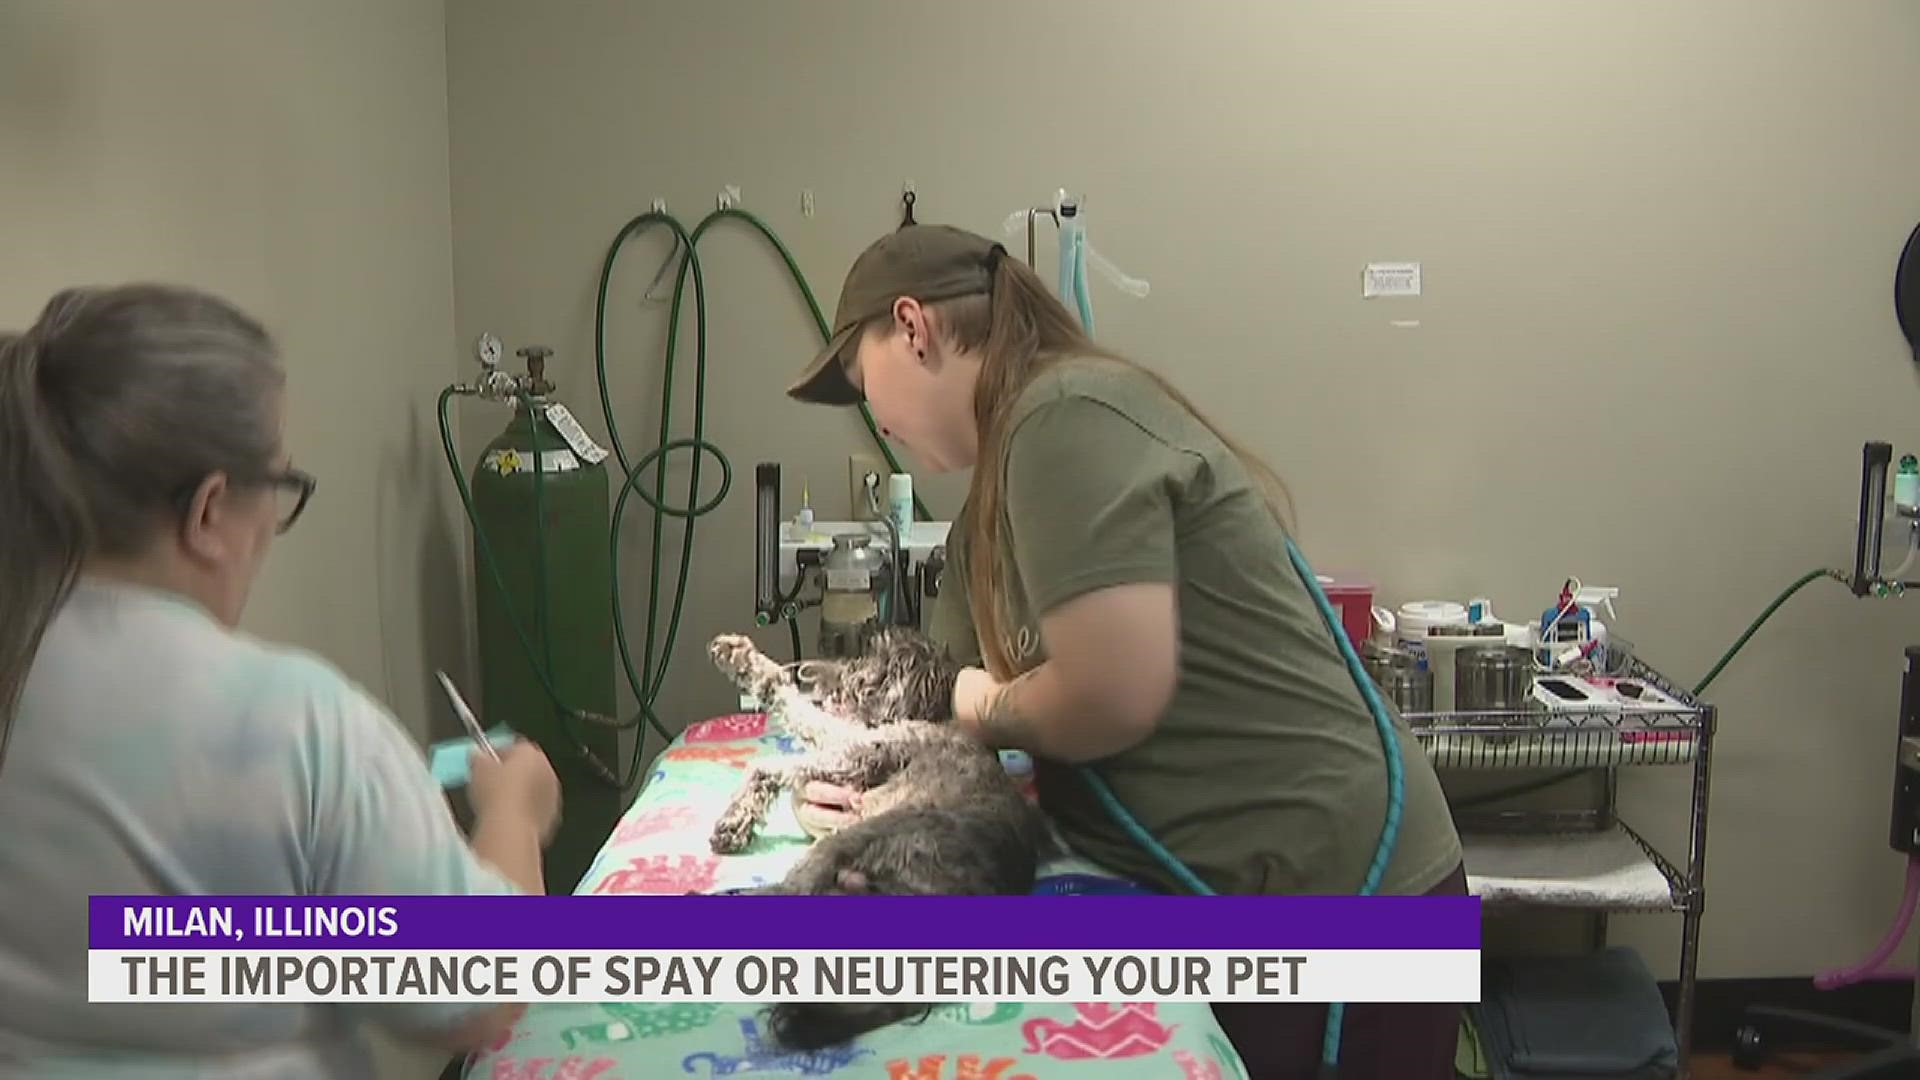 The Quad City Animal Welfare Center does conducts roughly 400 surgeries a month.